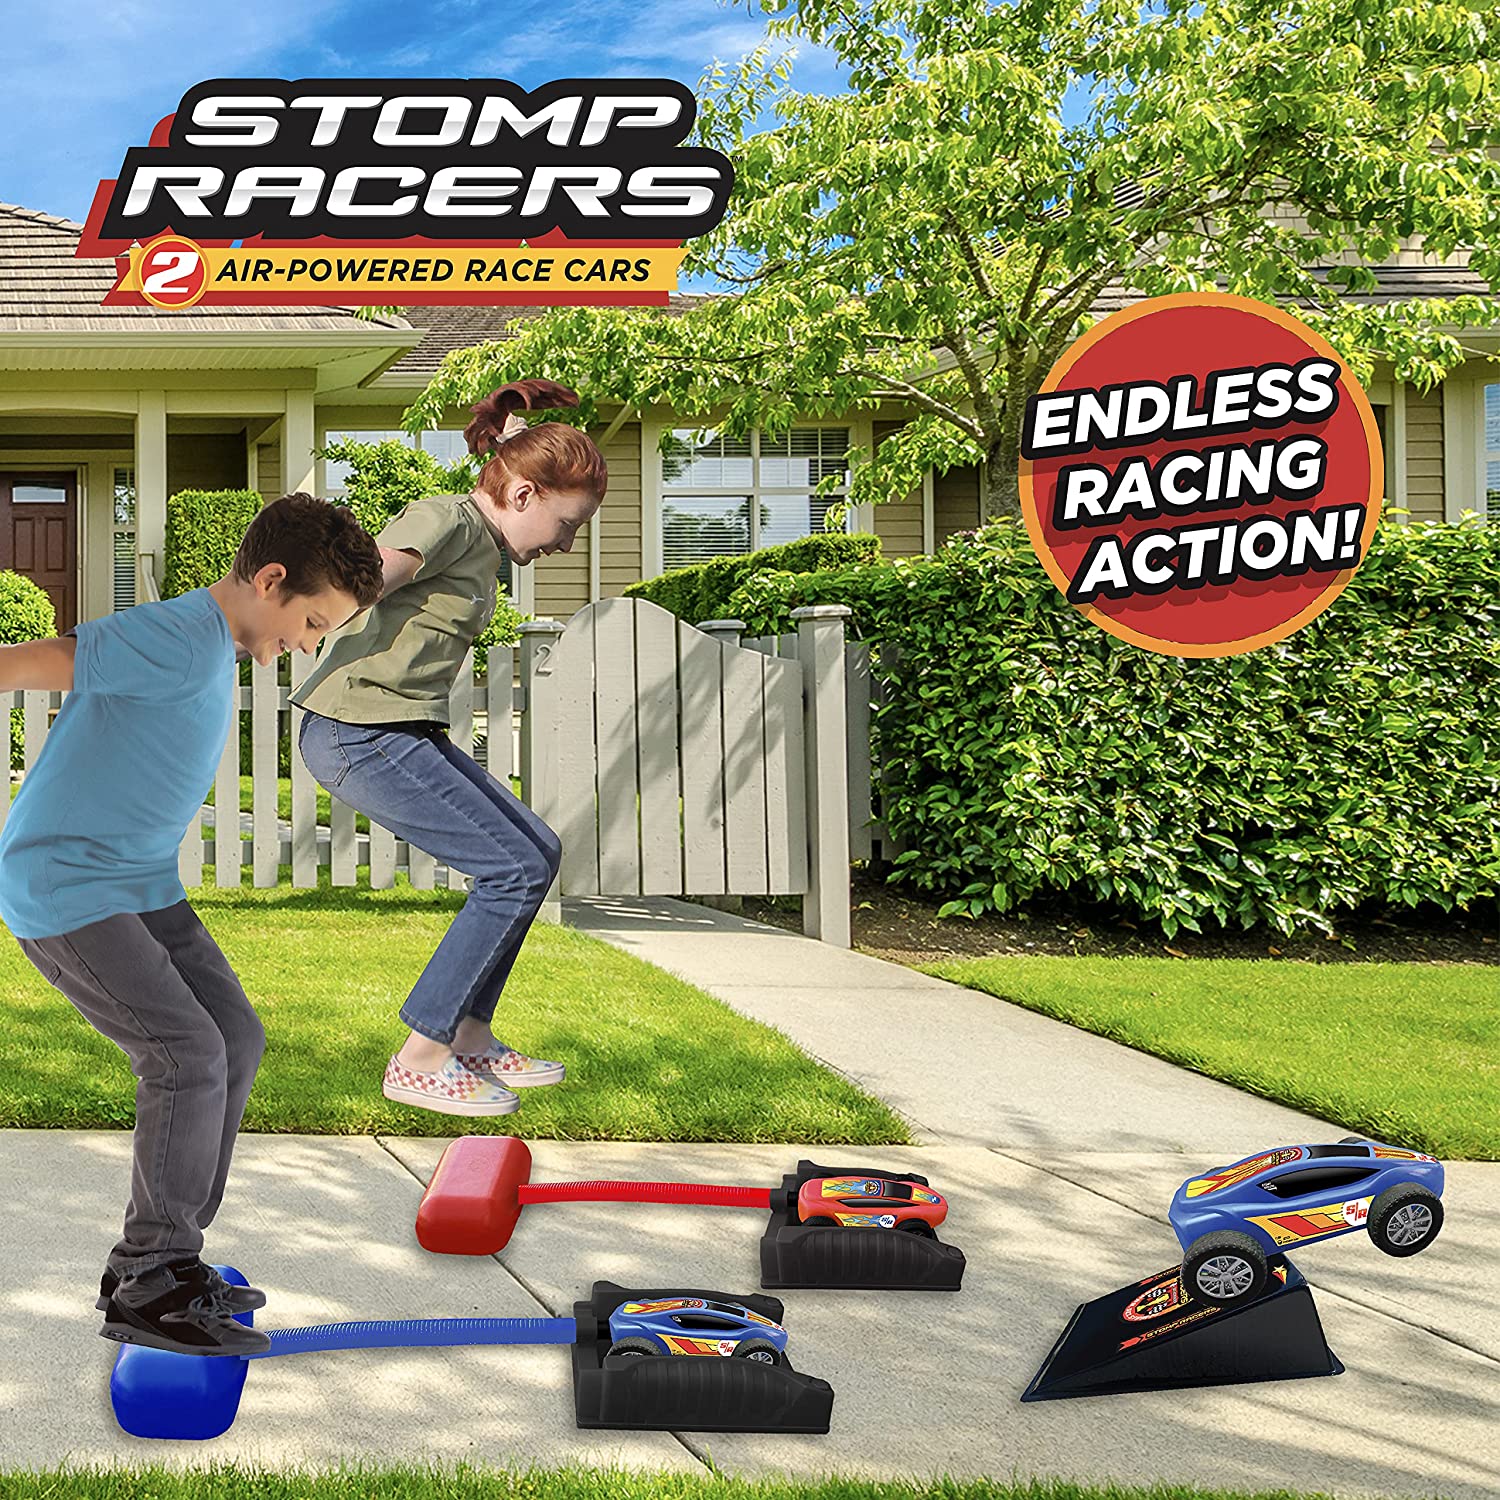 Stomp Racers Dueling